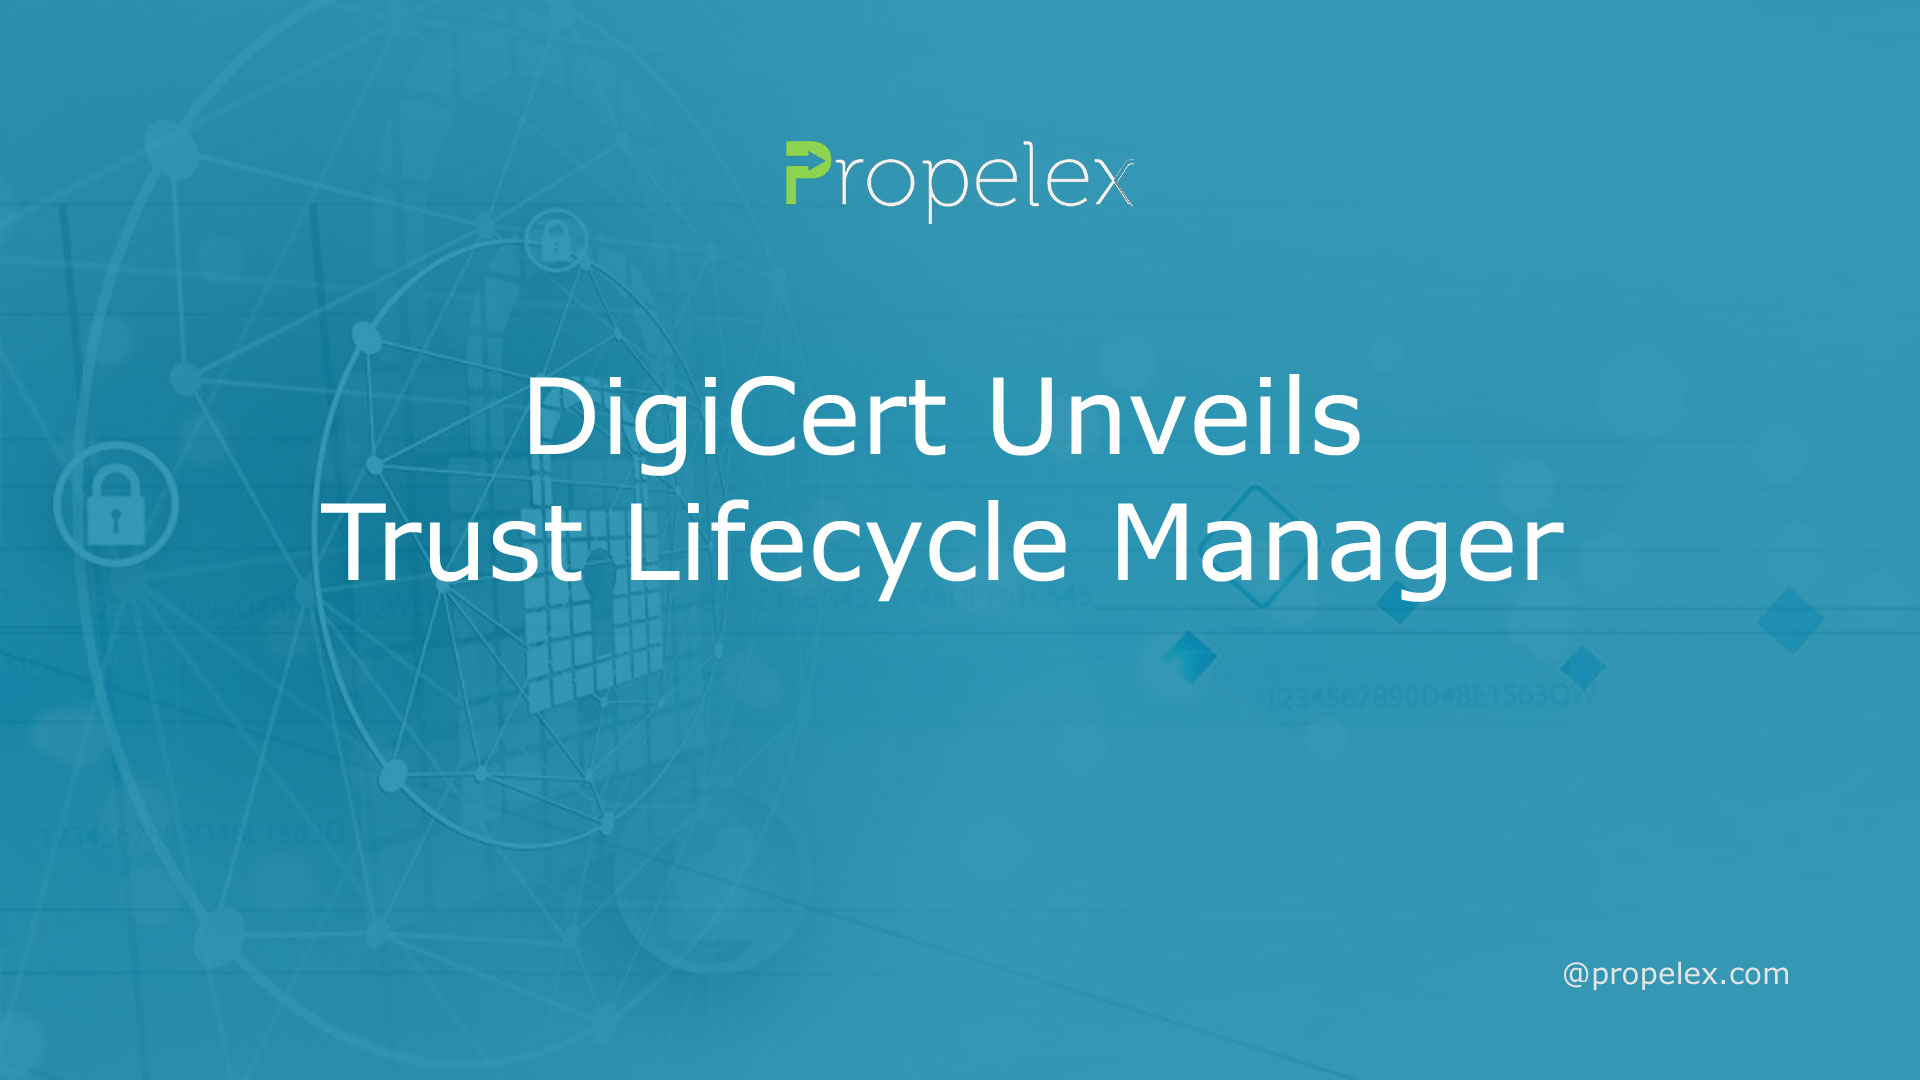 DigiCert Unveils Trust Lifecycle Manager